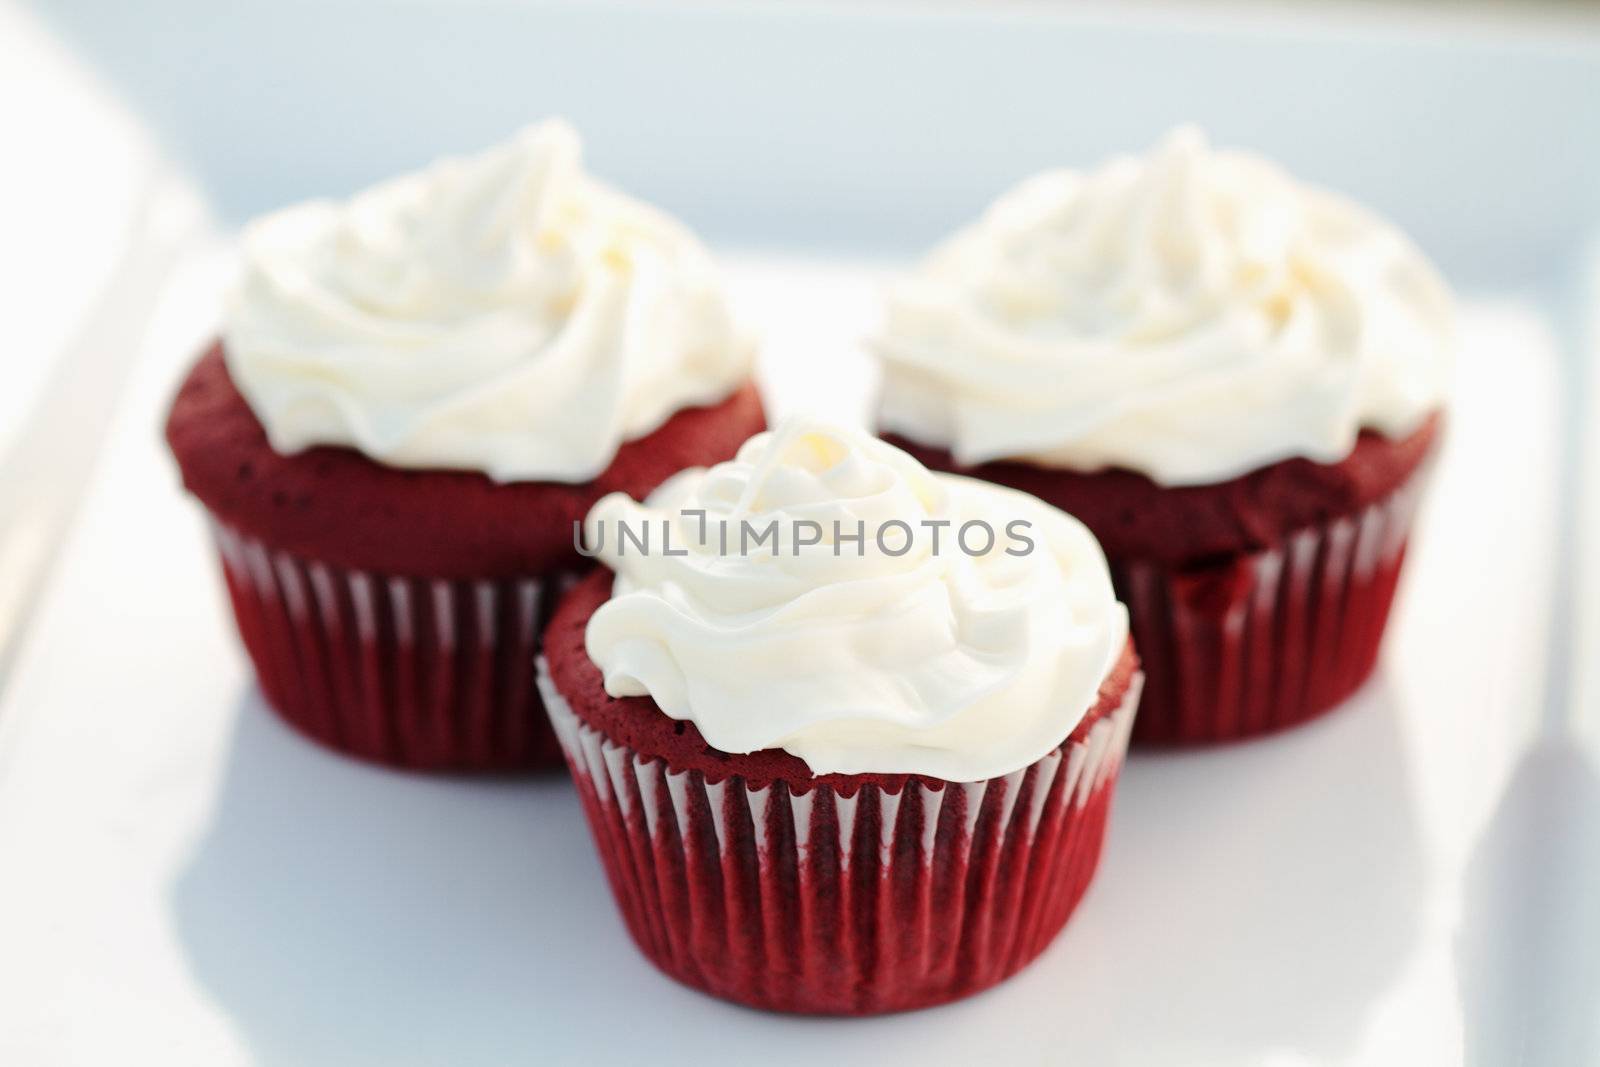 Three red velvet cupcakes on a white dish with extreme shallow DOF.